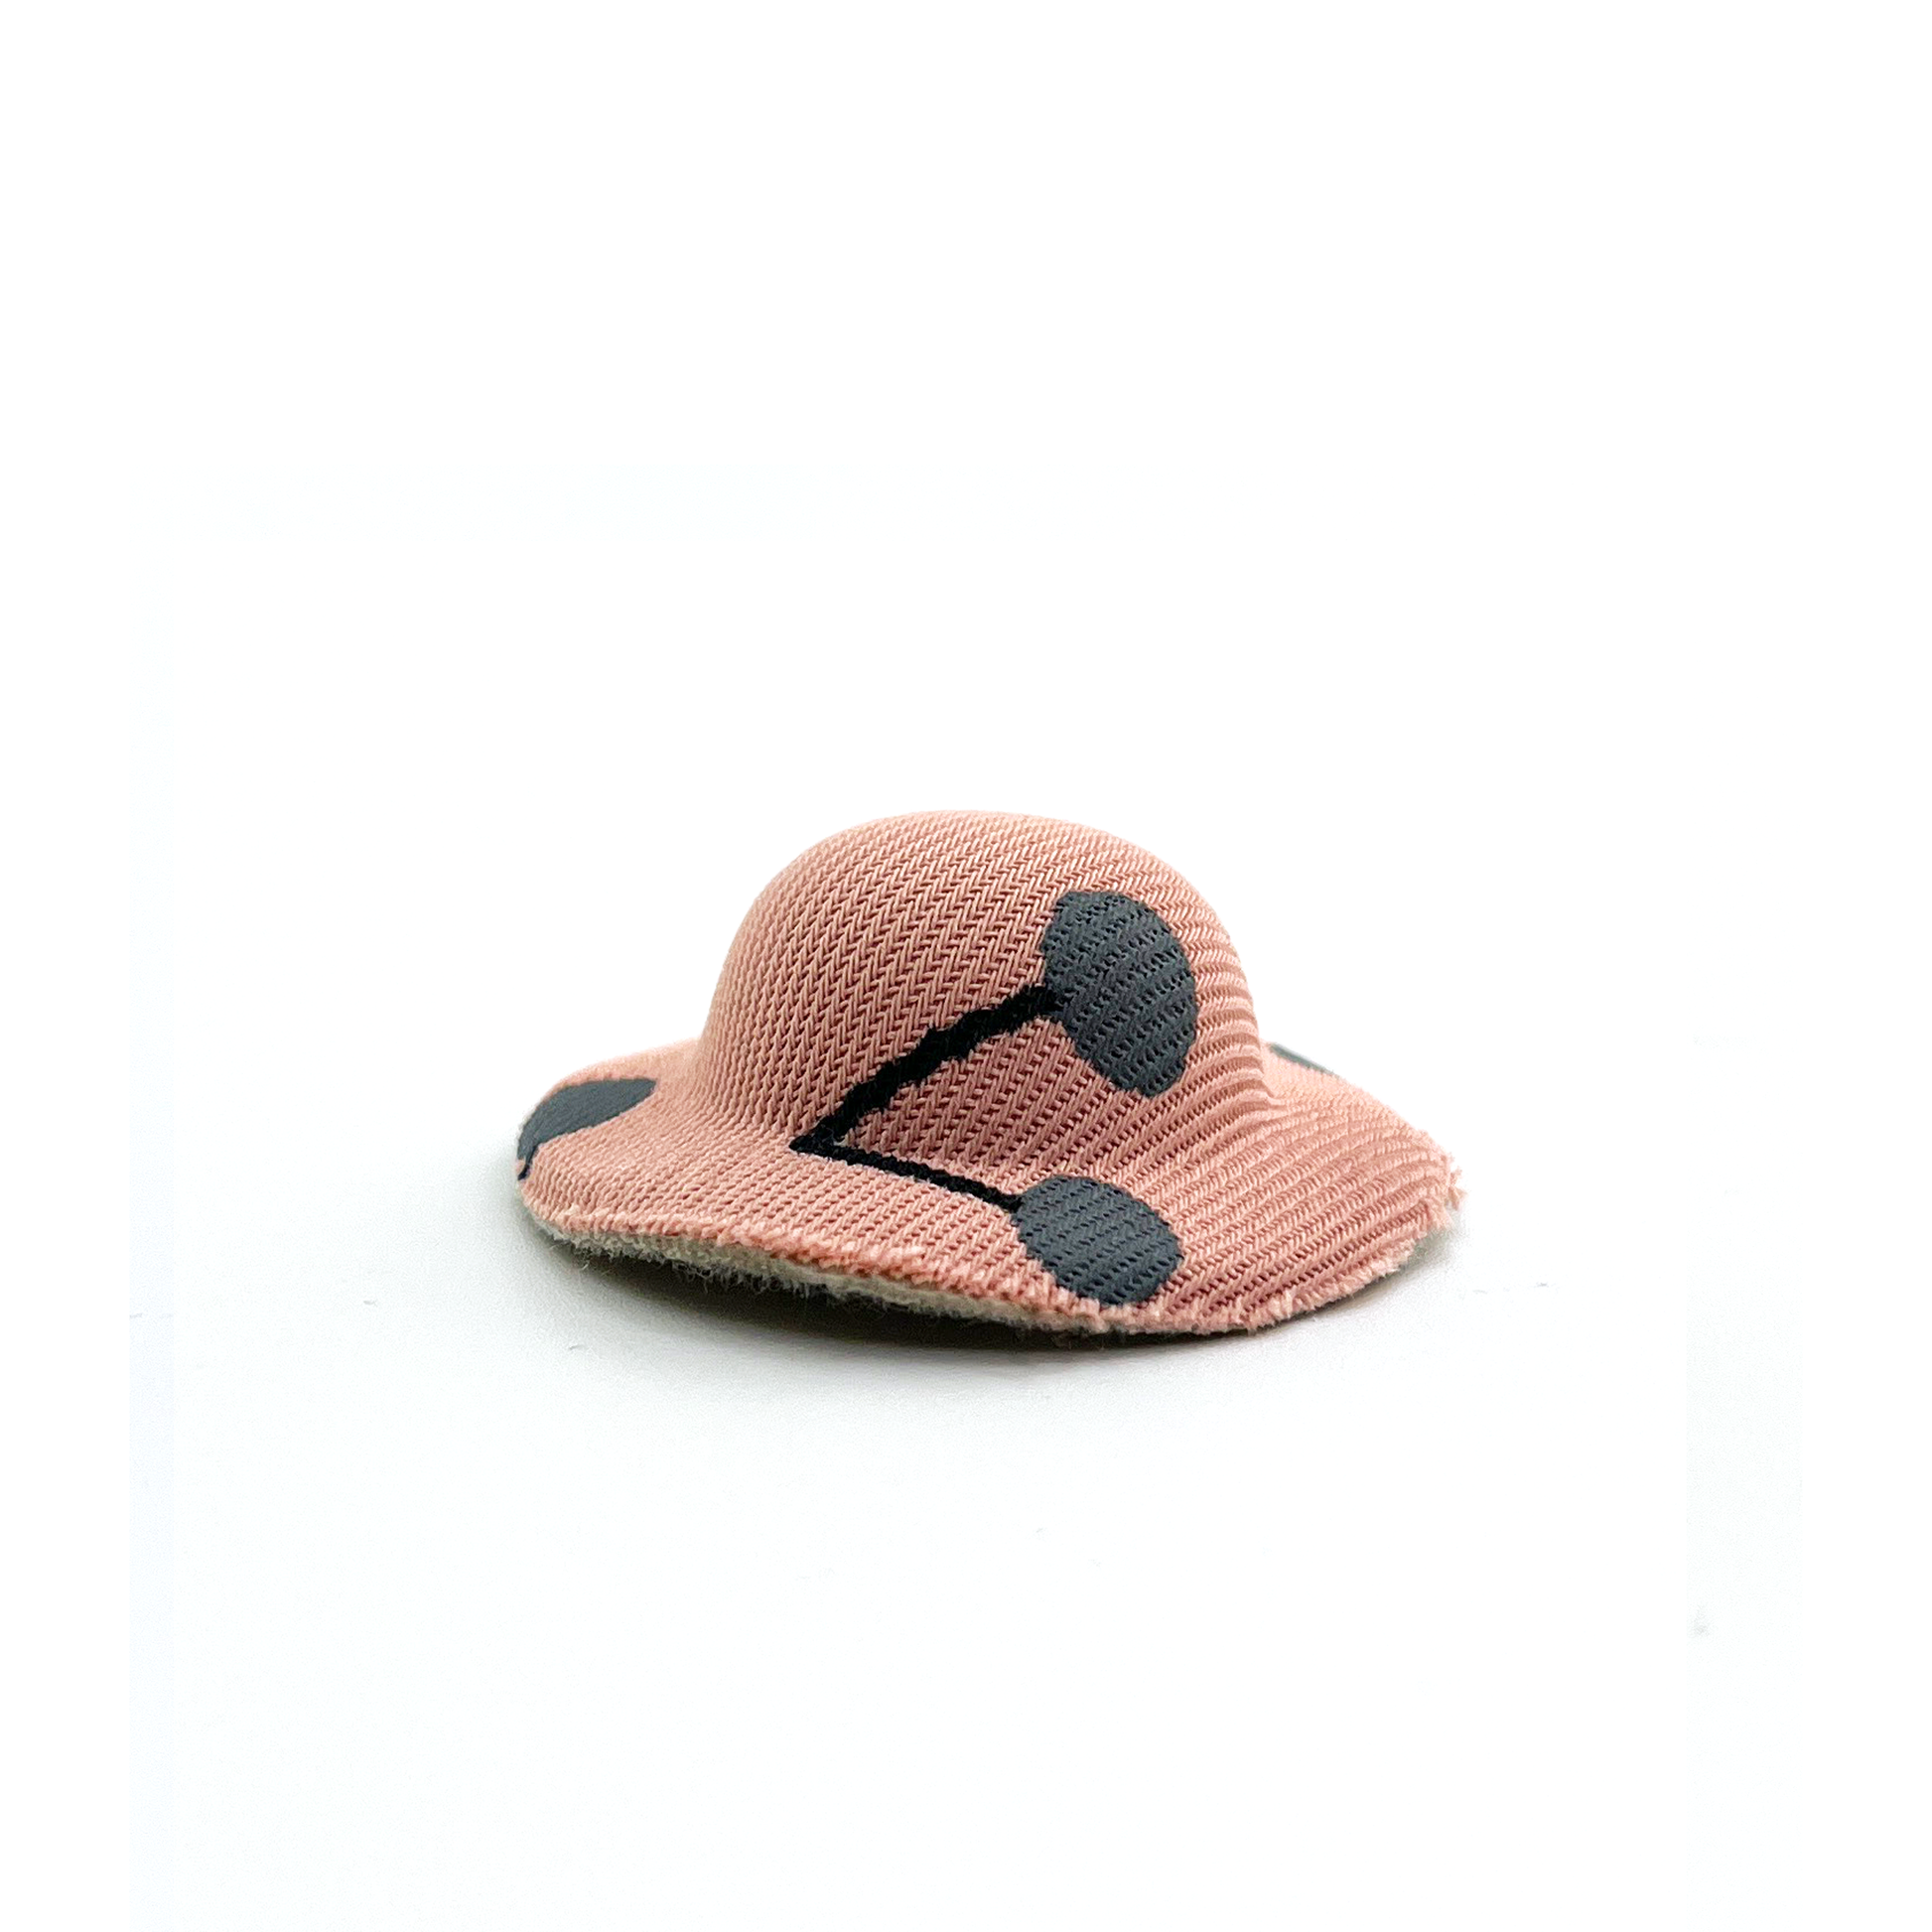 Chico Hat – Moss Amigos